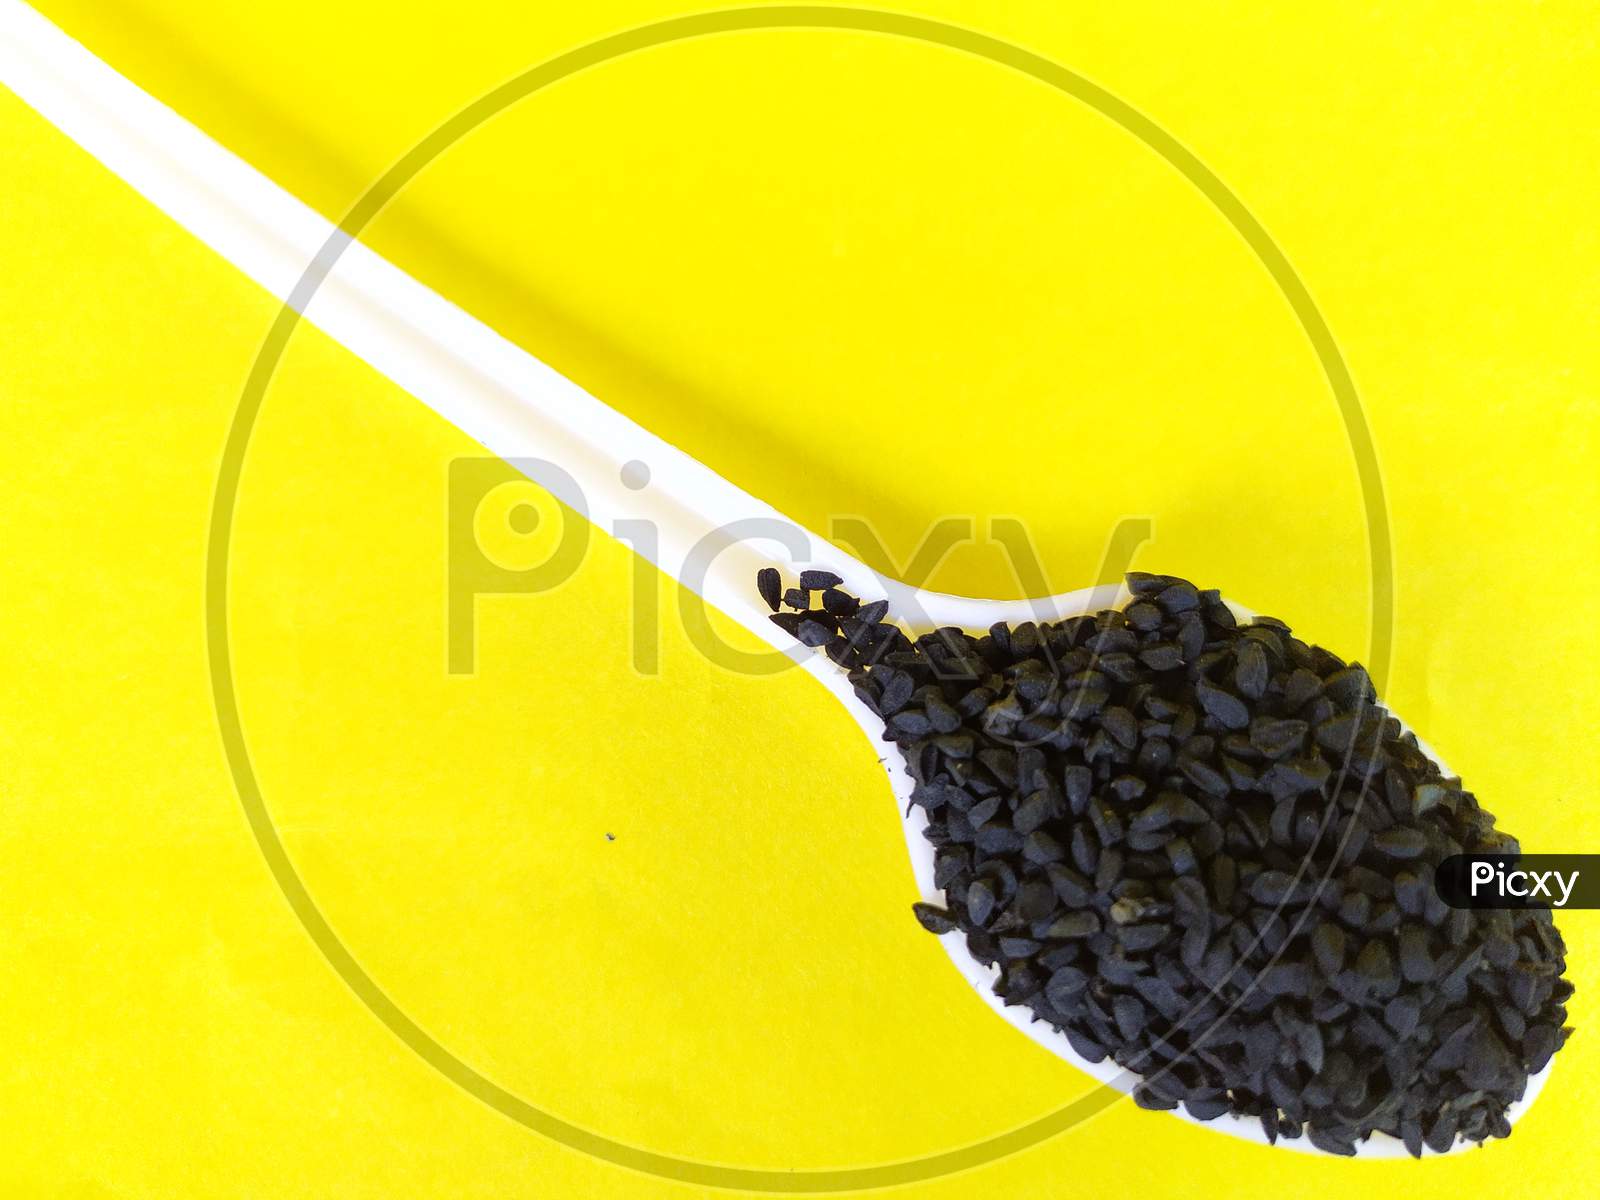 Black cumin seeds in a spoon, Yellow background.